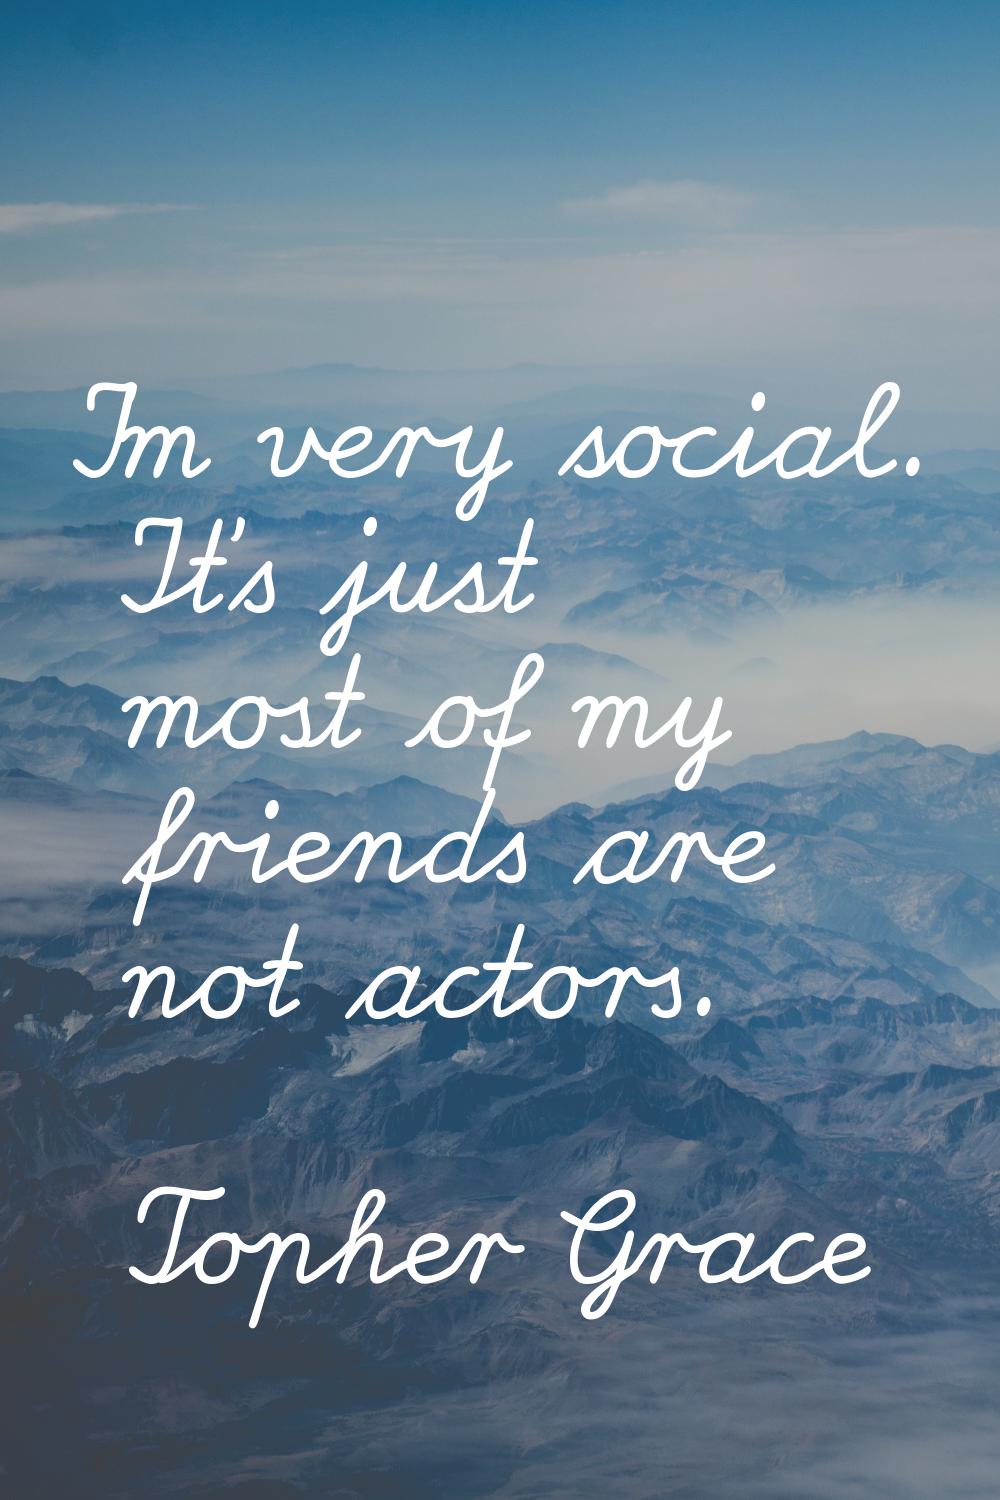 I'm very social. It's just most of my friends are not actors.